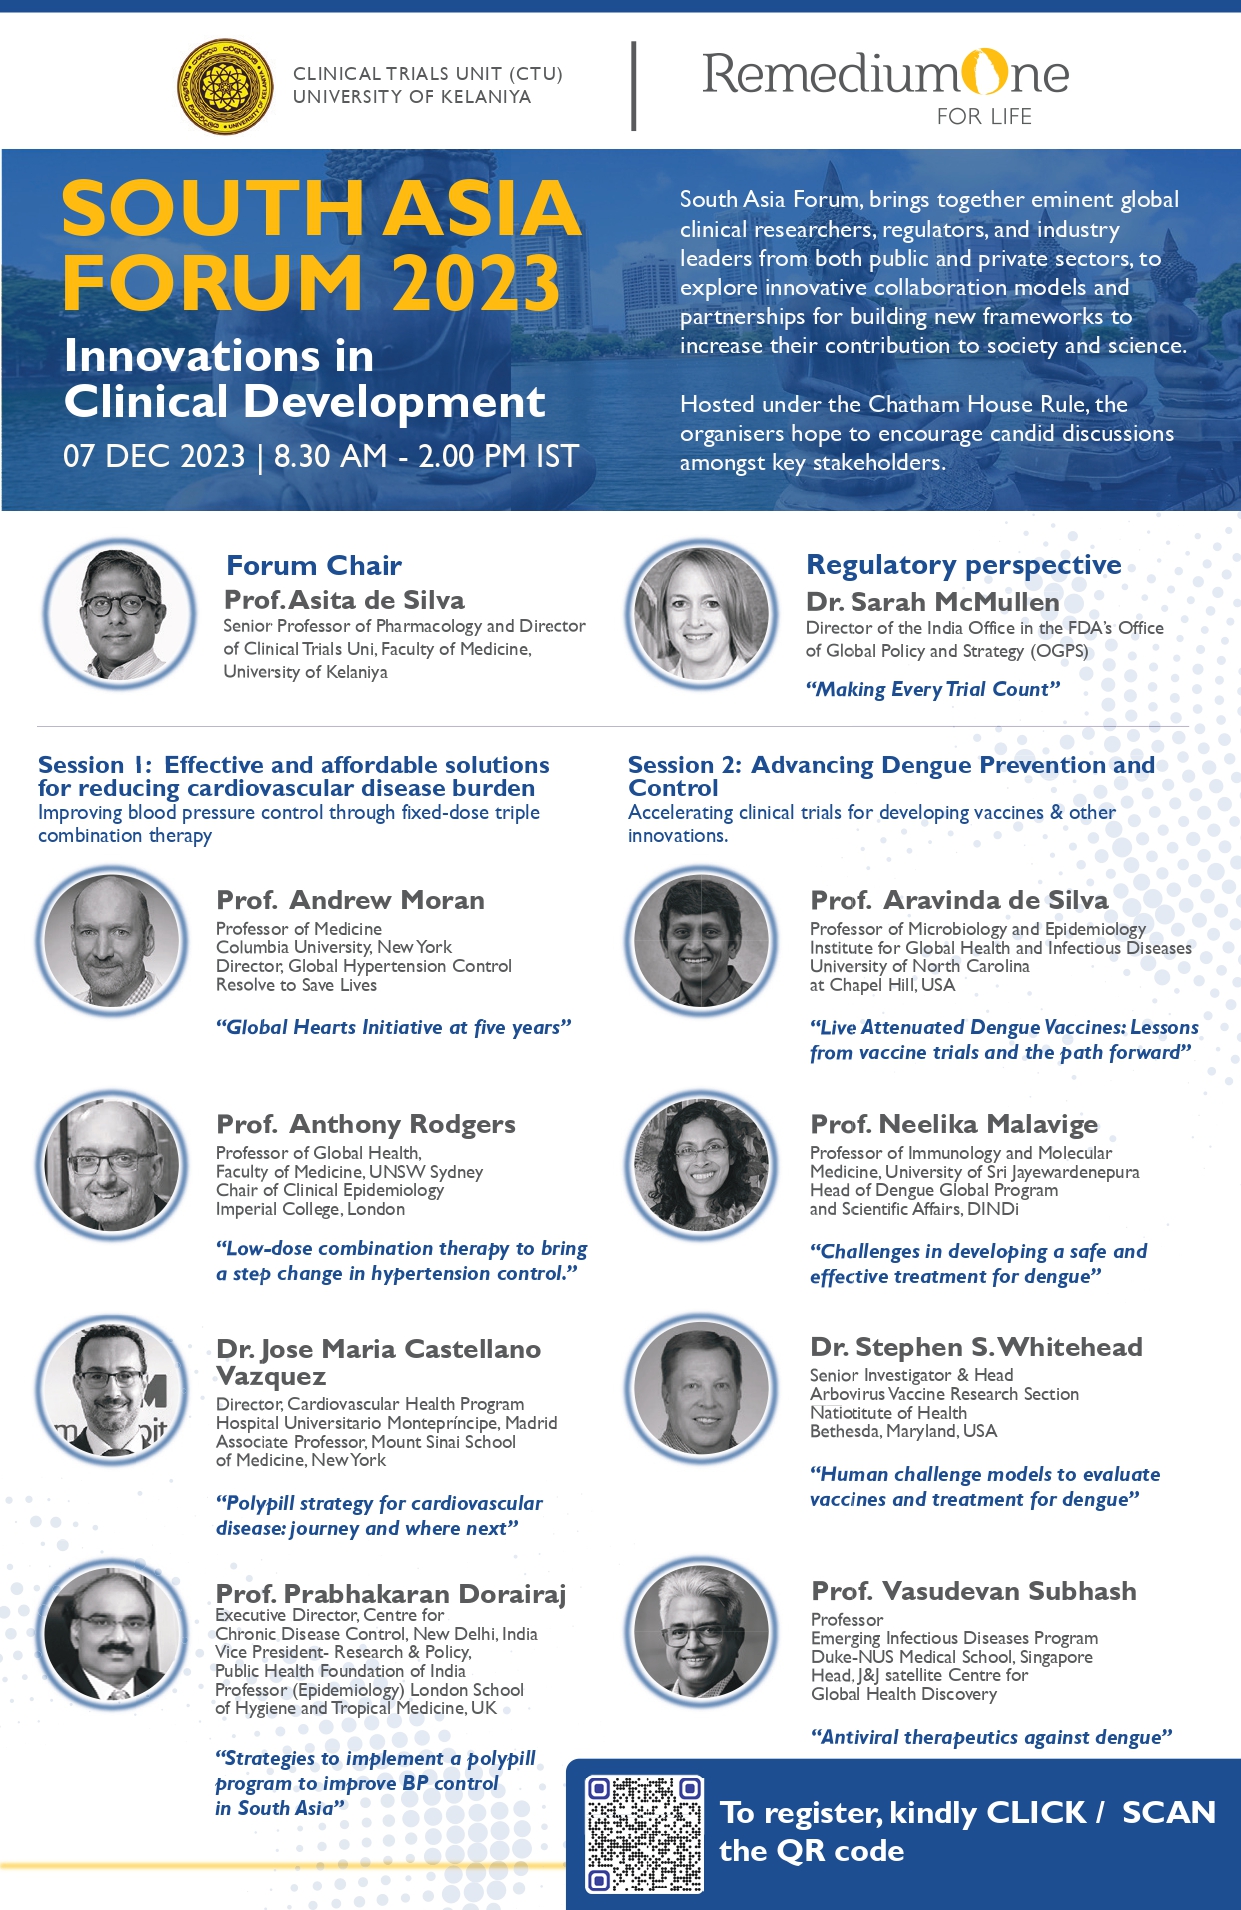 South Asia Forum on Clinical Development 2023